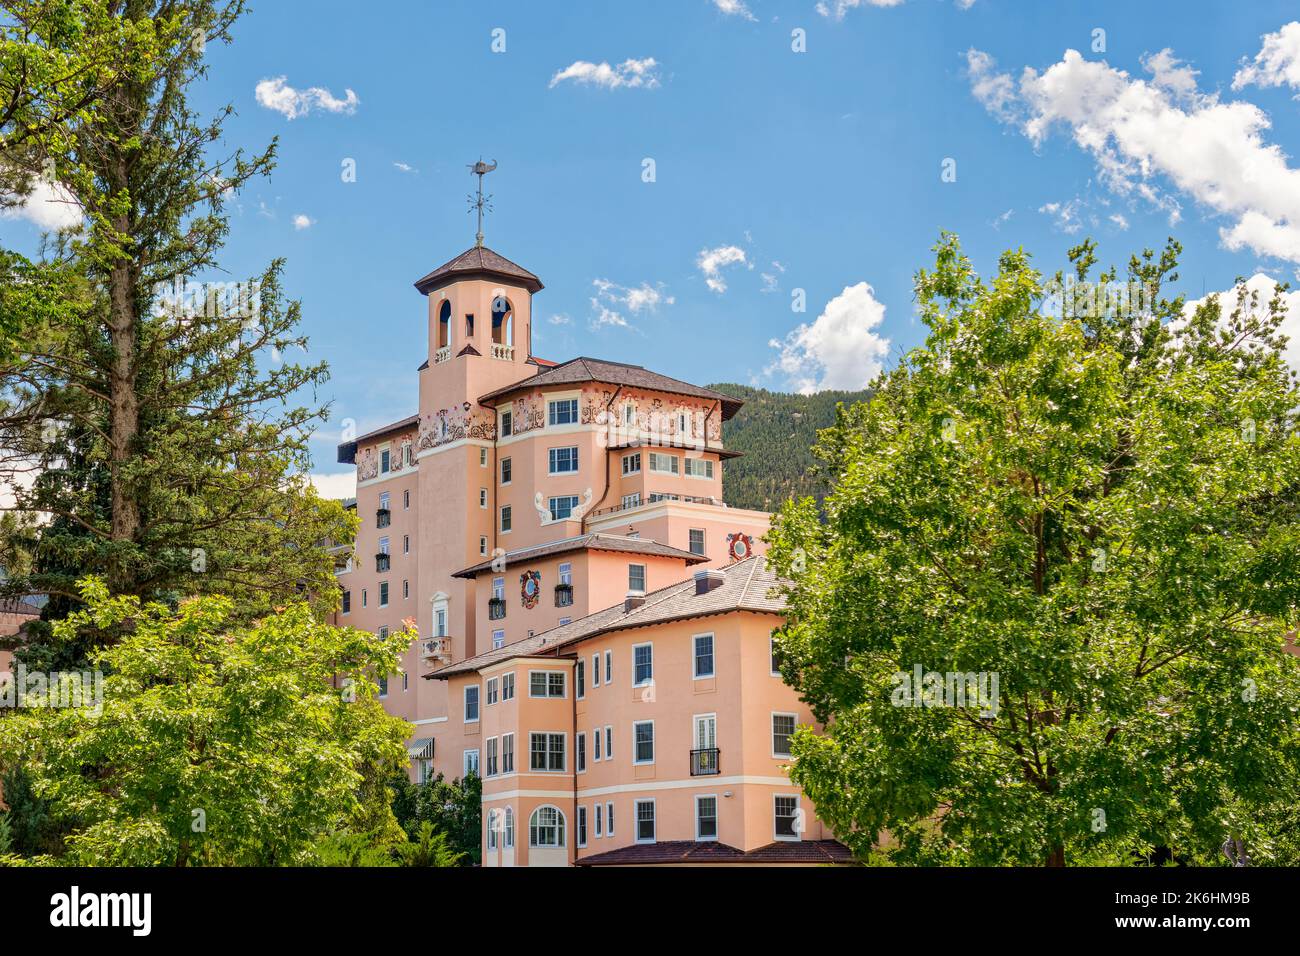 Colorado Springs, CO - July 8, 2022: The Broadmoor is a Forbes Five-Star and AAA Five-Diamond destination resort. Stock Photo